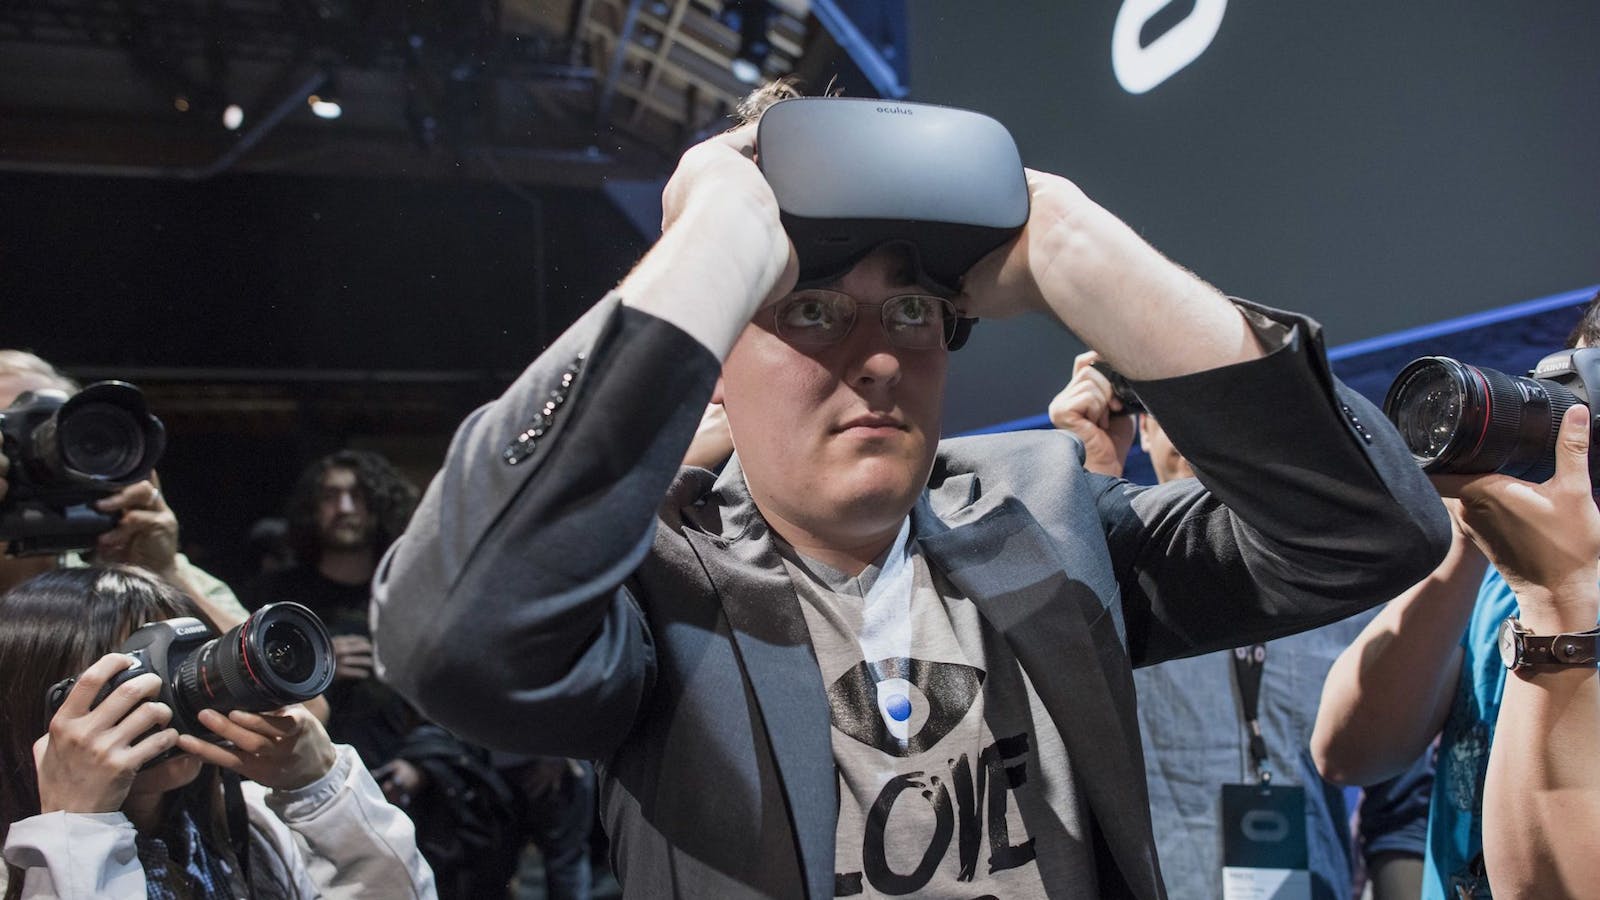 Palmer Luckey at an Oculus event in 2015. Photo: Bloomberg.